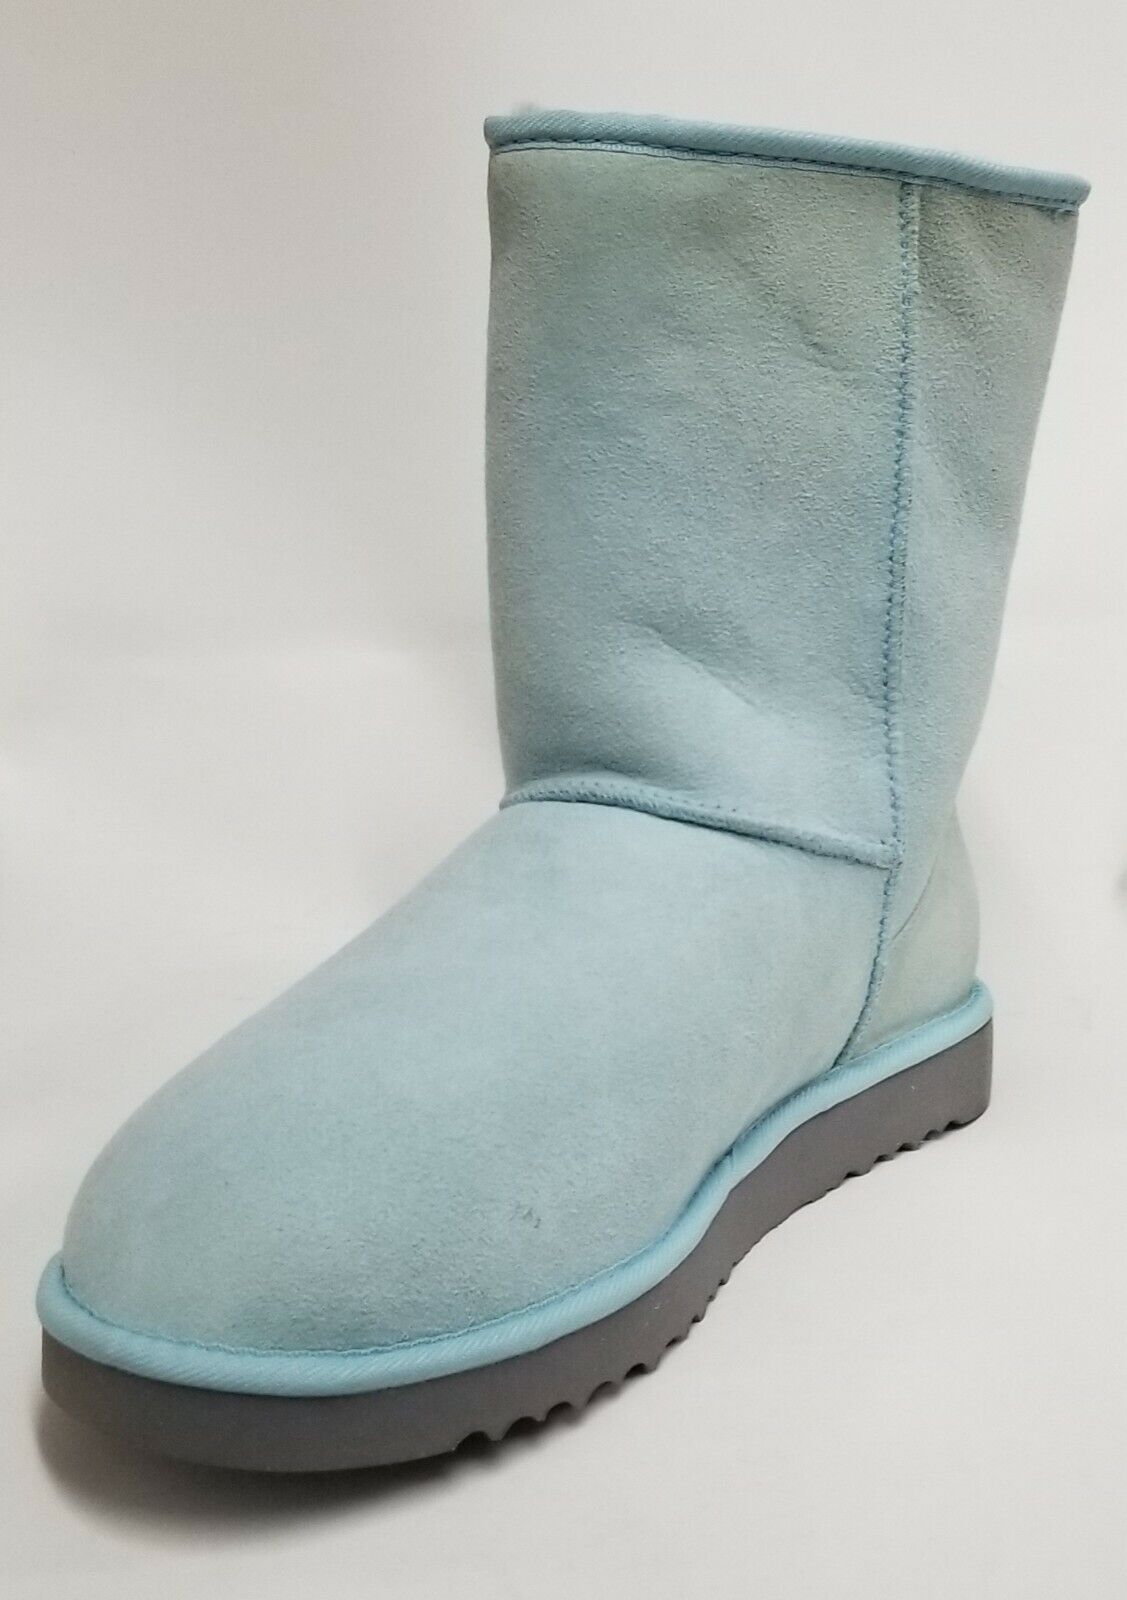 Women's UGG Boots Hard to Find Pair Shoes AS IS Rarest Find Limited Edition